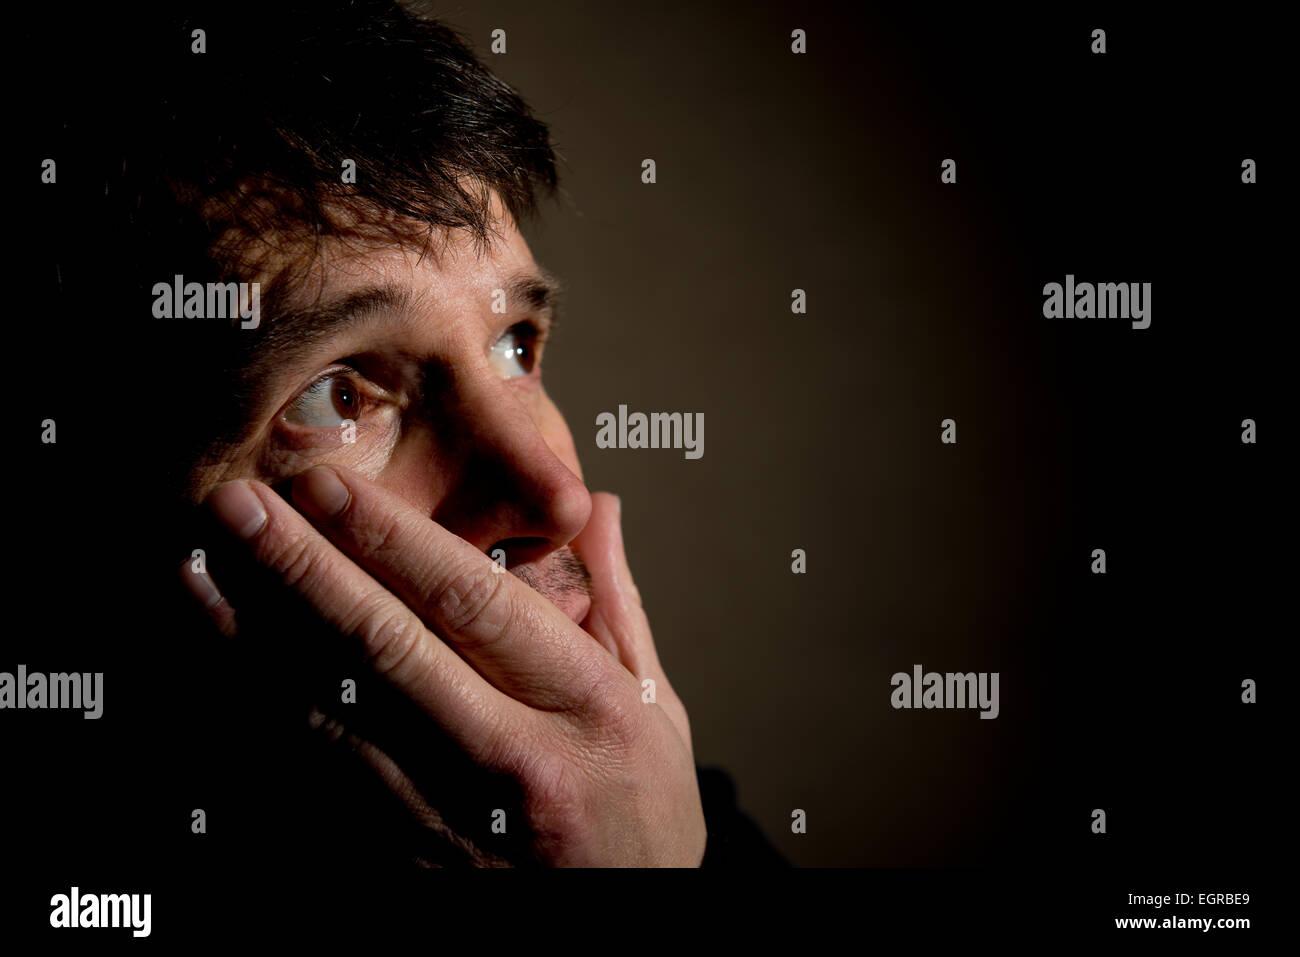 Close up of man with his head in his hand, his eyes are looking away in fear/shock. Stock Photo